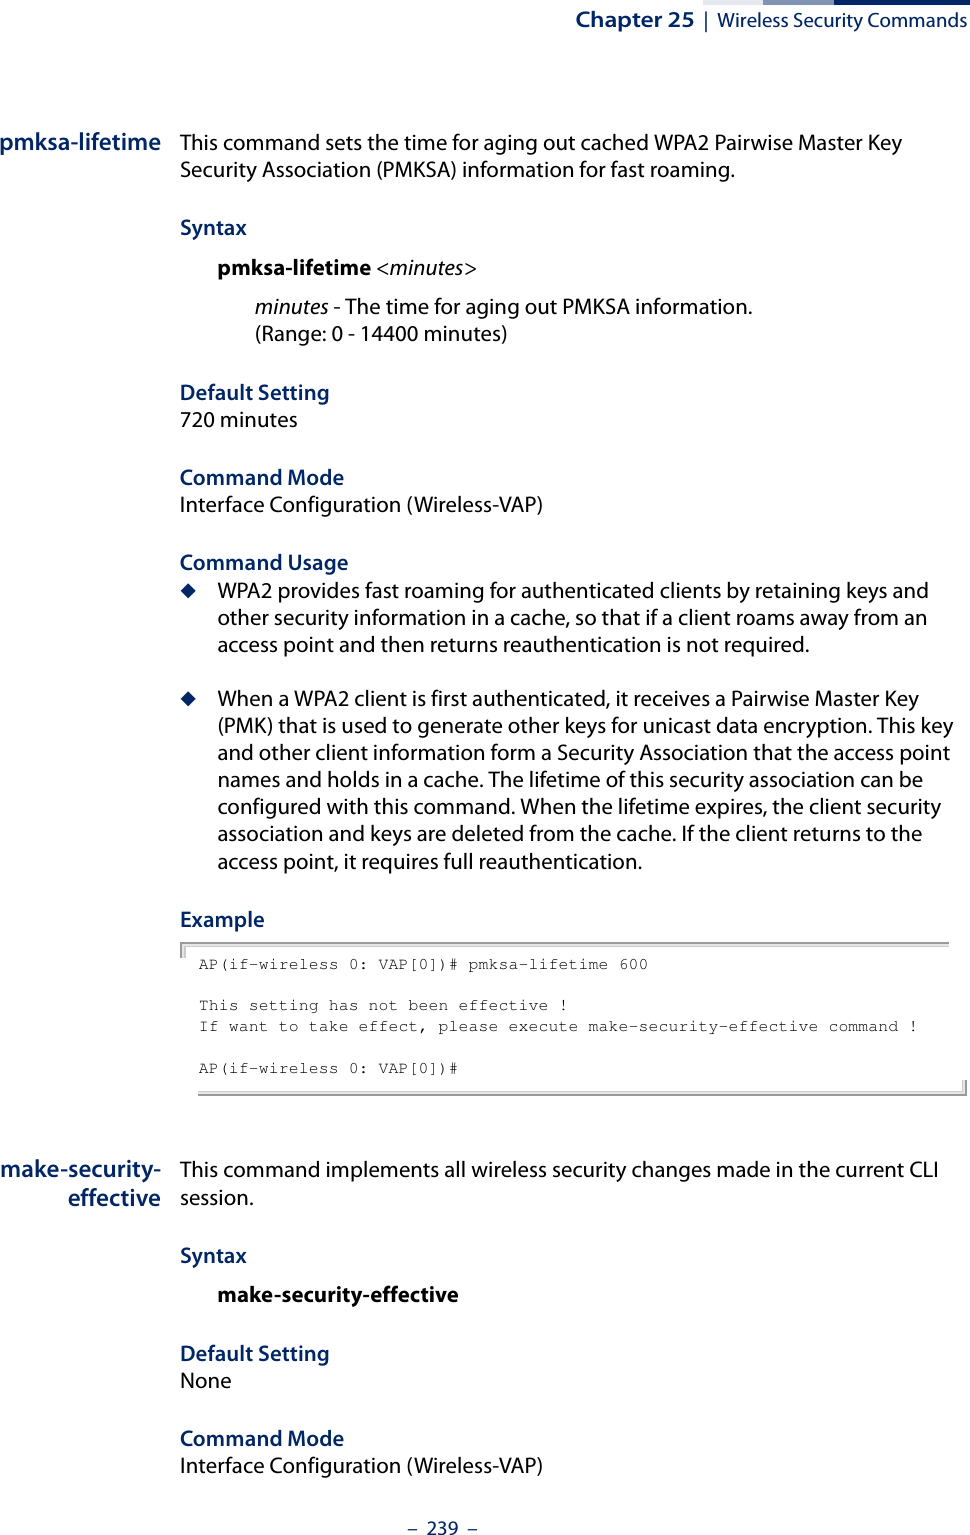 Chapter 25  |  Wireless Security Commands–  239  –pmksa-lifetime This command sets the time for aging out cached WPA2 Pairwise Master Key Security Association (PMKSA) information for fast roaming.Syntaxpmksa-lifetime &lt;minutes&gt;minutes - The time for aging out PMKSA information. (Range: 0 - 14400 minutes)Default Setting 720 minutesCommand Mode Interface Configuration (Wireless-VAP)Command Usage ◆WPA2 provides fast roaming for authenticated clients by retaining keys and other security information in a cache, so that if a client roams away from an access point and then returns reauthentication is not required. ◆When a WPA2 client is first authenticated, it receives a Pairwise Master Key (PMK) that is used to generate other keys for unicast data encryption. This key and other client information form a Security Association that the access point names and holds in a cache. The lifetime of this security association can be configured with this command. When the lifetime expires, the client security association and keys are deleted from the cache. If the client returns to the access point, it requires full reauthentication.ExampleAP(if-wireless 0: VAP[0])# pmksa-lifetime 600This setting has not been effective !If want to take effect, please execute make-security-effective command !AP(if-wireless 0: VAP[0])#make-security-effectiveThis command implements all wireless security changes made in the current CLI session.Syntaxmake-security-effectiveDefault Setting NoneCommand Mode Interface Configuration (Wireless-VAP)